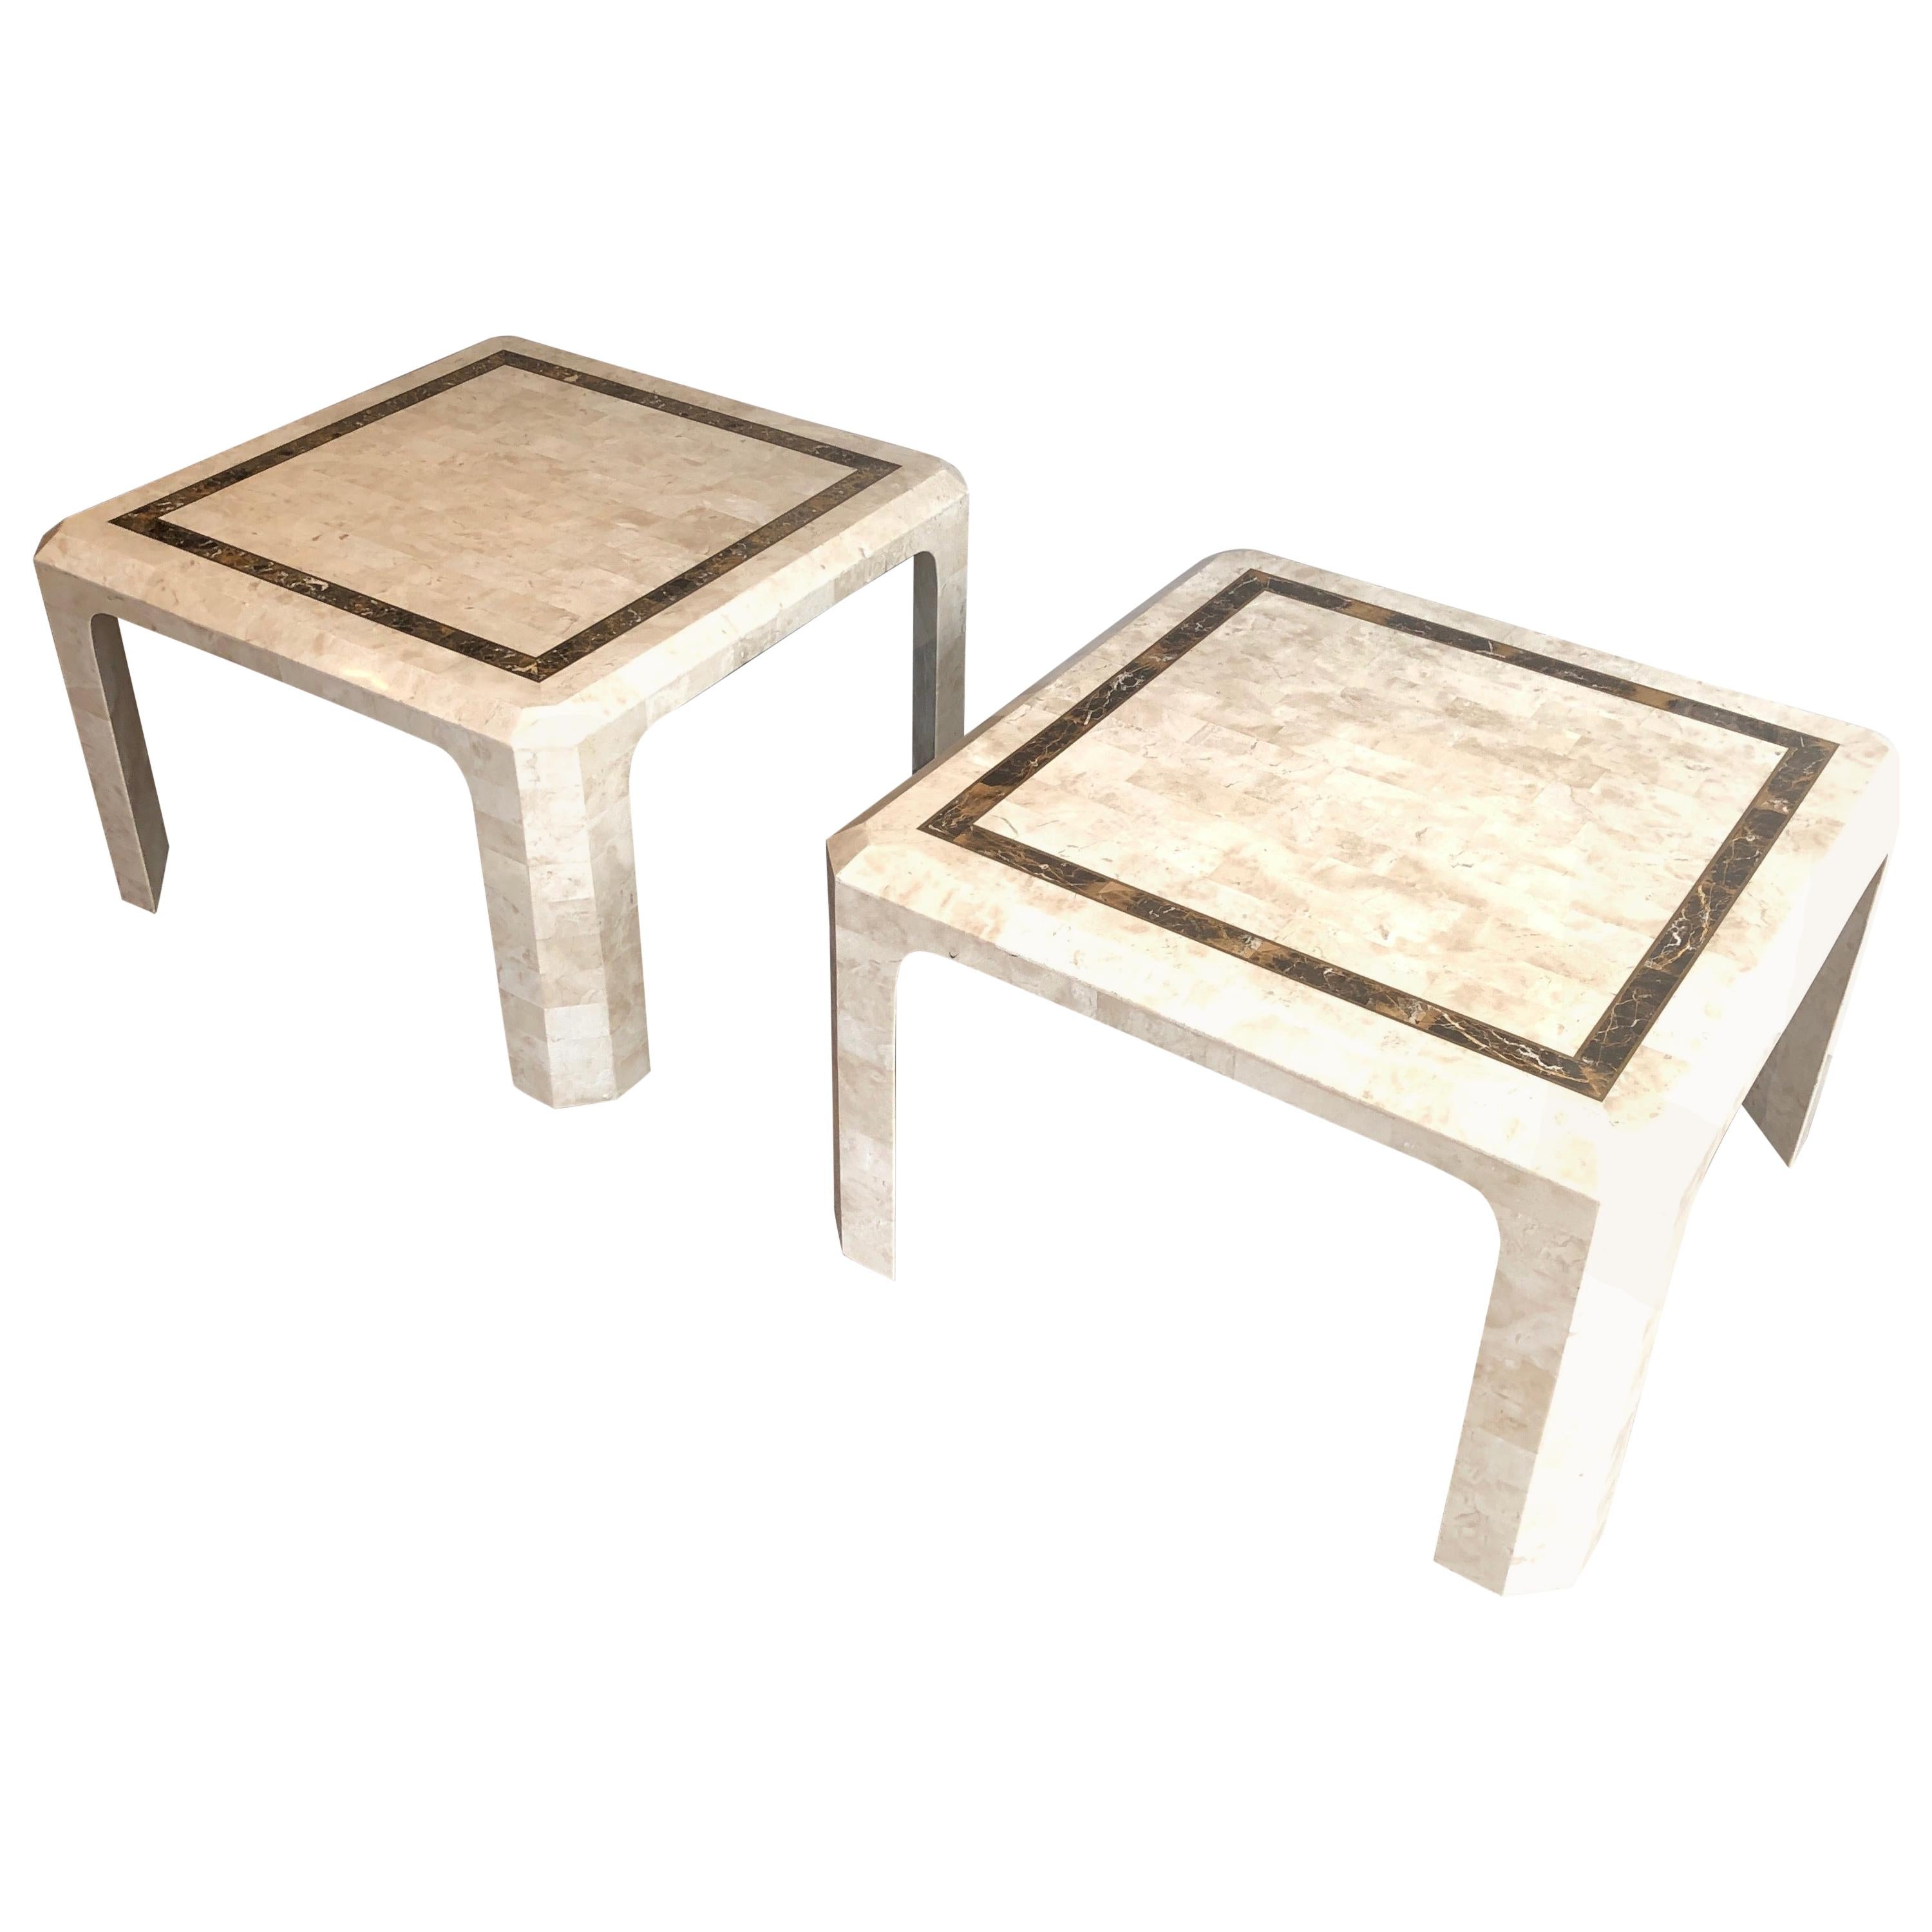 Pair of Marble Plates Side Tables with a Brass Line, French, Circa 1970 For Sale